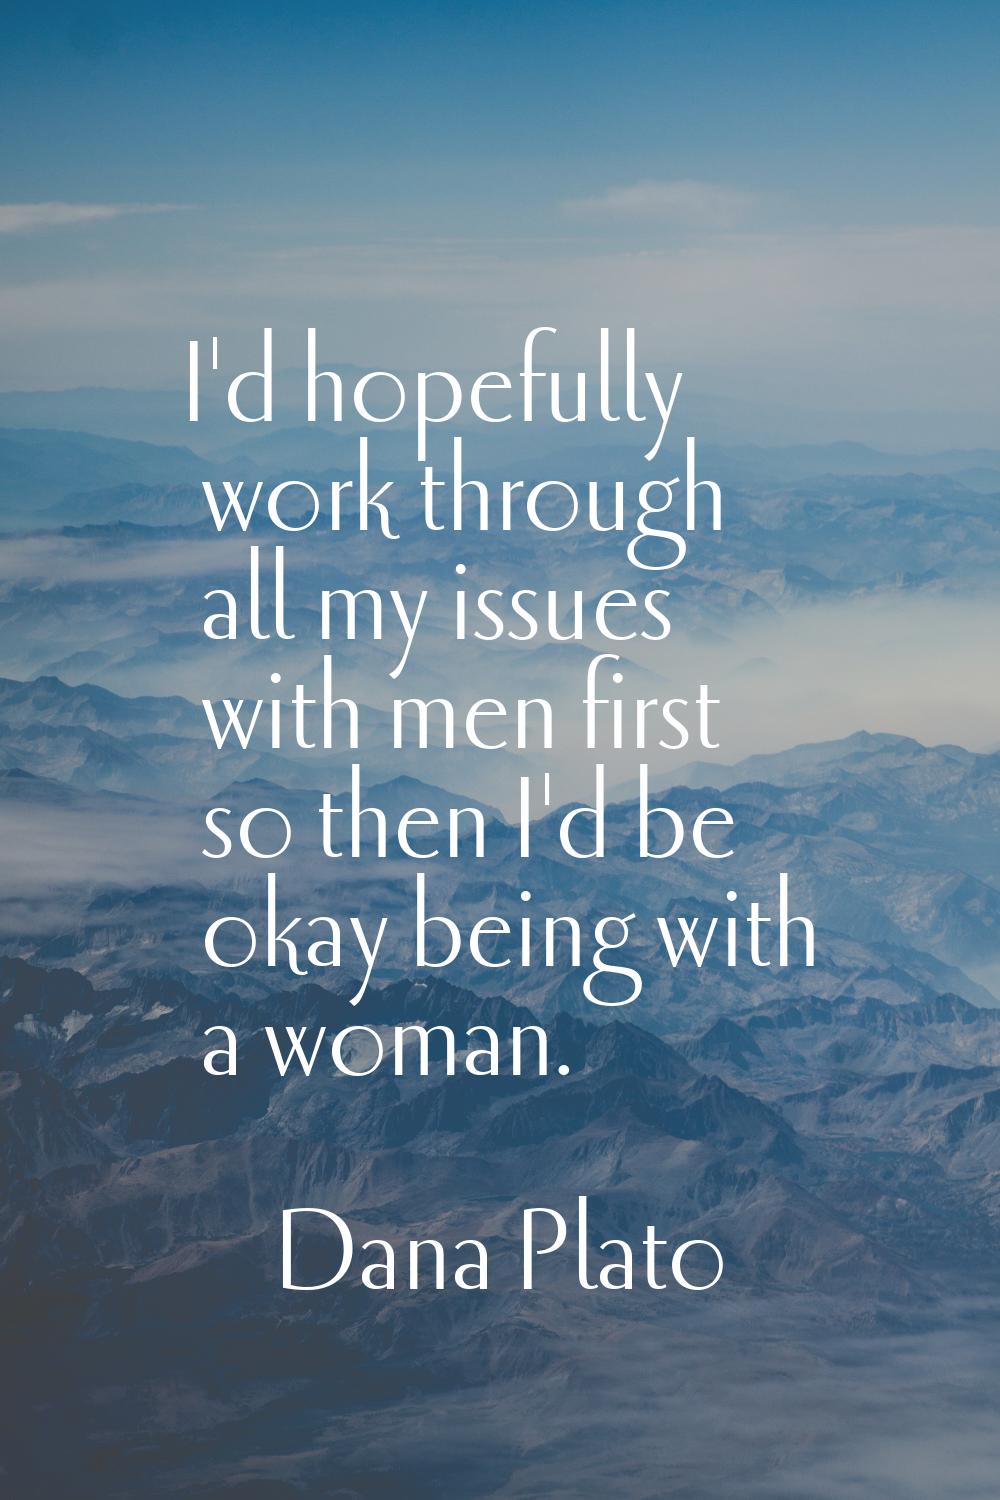 I'd hopefully work through all my issues with men first so then I'd be okay being with a woman.